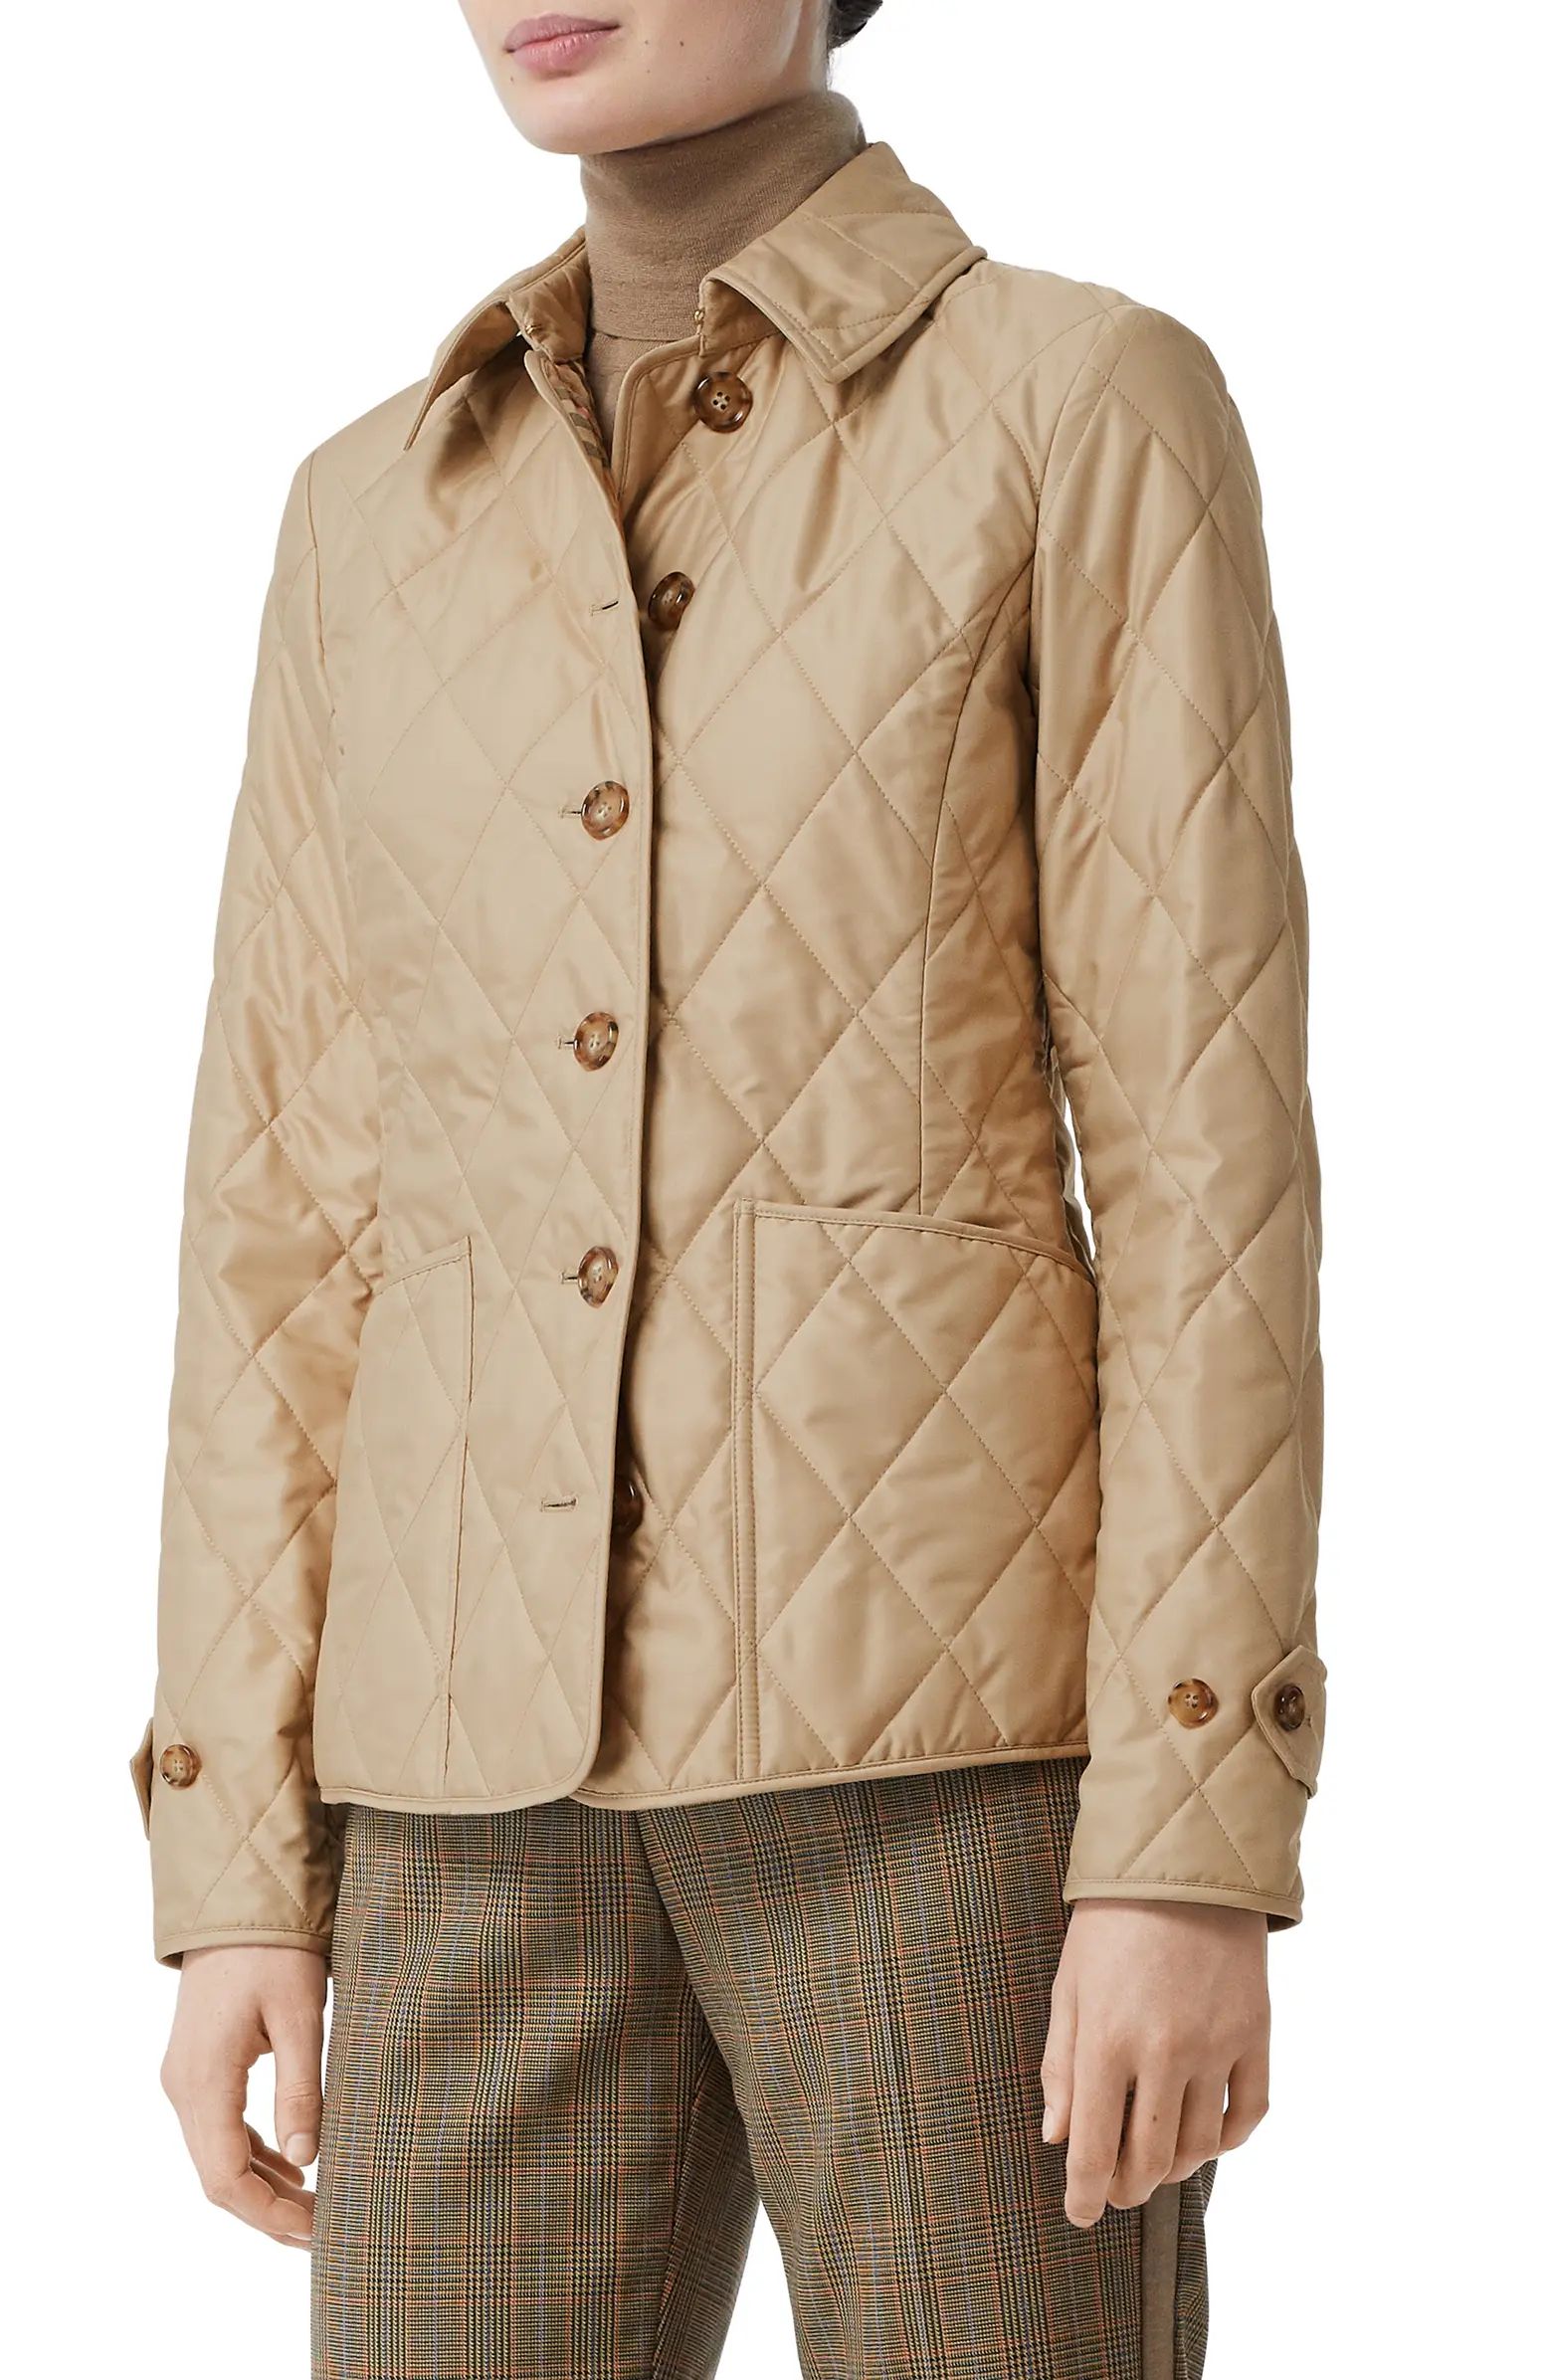 Fernleigh Thermoregulated Diamond Quilted Jacket | Nordstrom